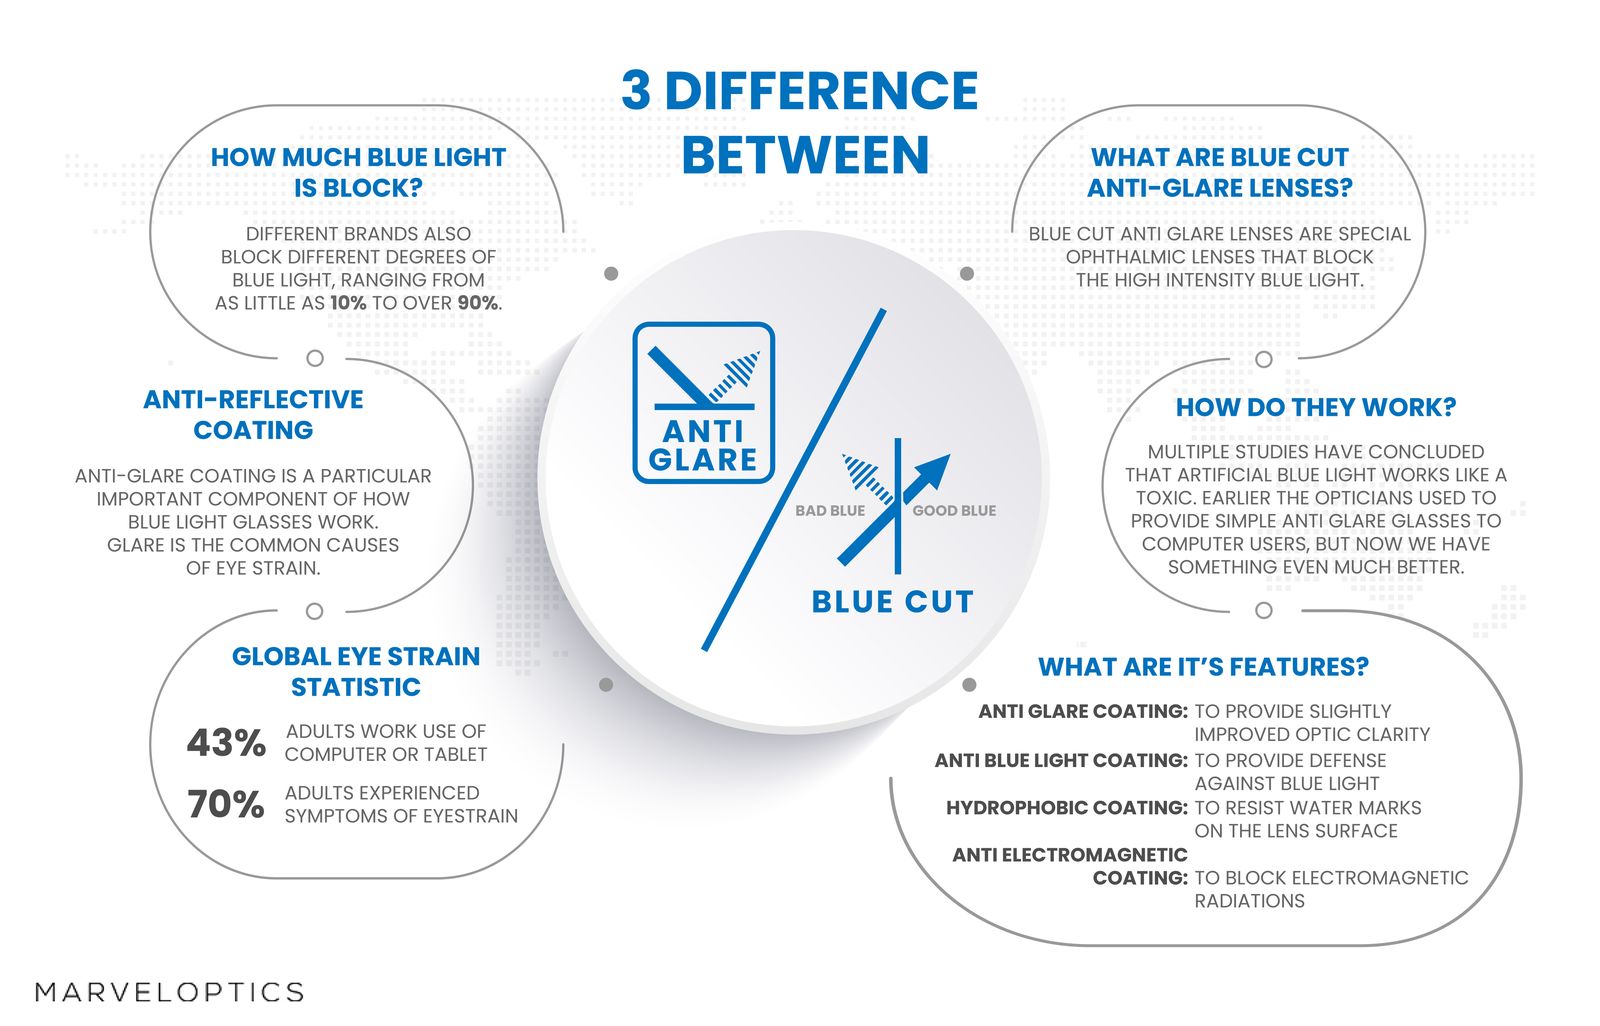 3 Differences Between Anti-Glare and Blue Cut Lenses Infographic